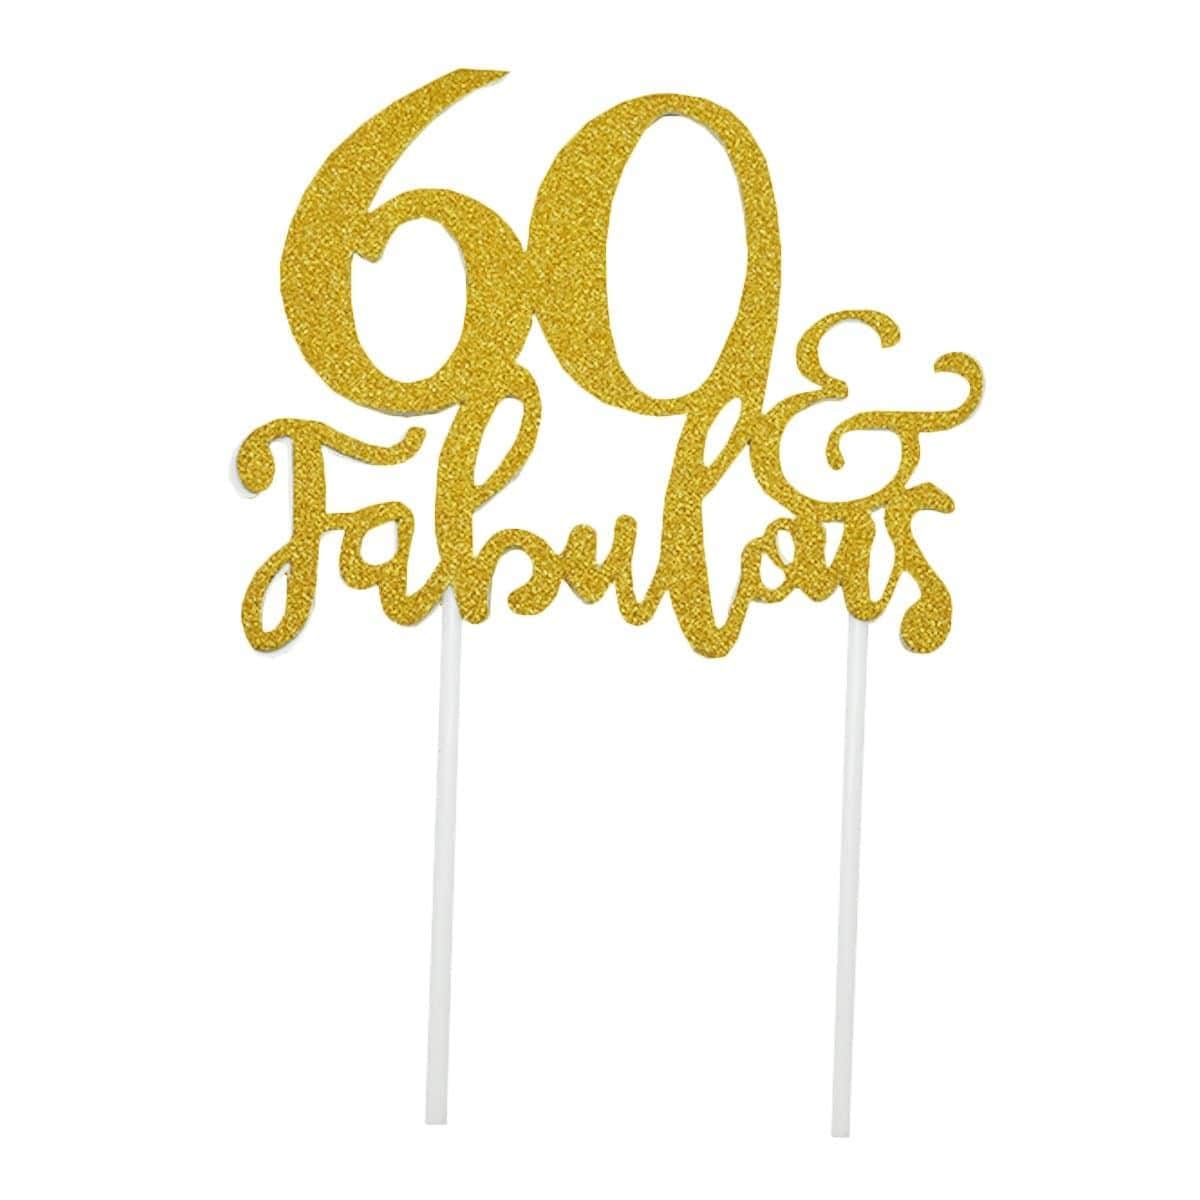 Buy Age Specific Birthday Glitter Cake Topper - 60 & Fabulous sold at Party Expert